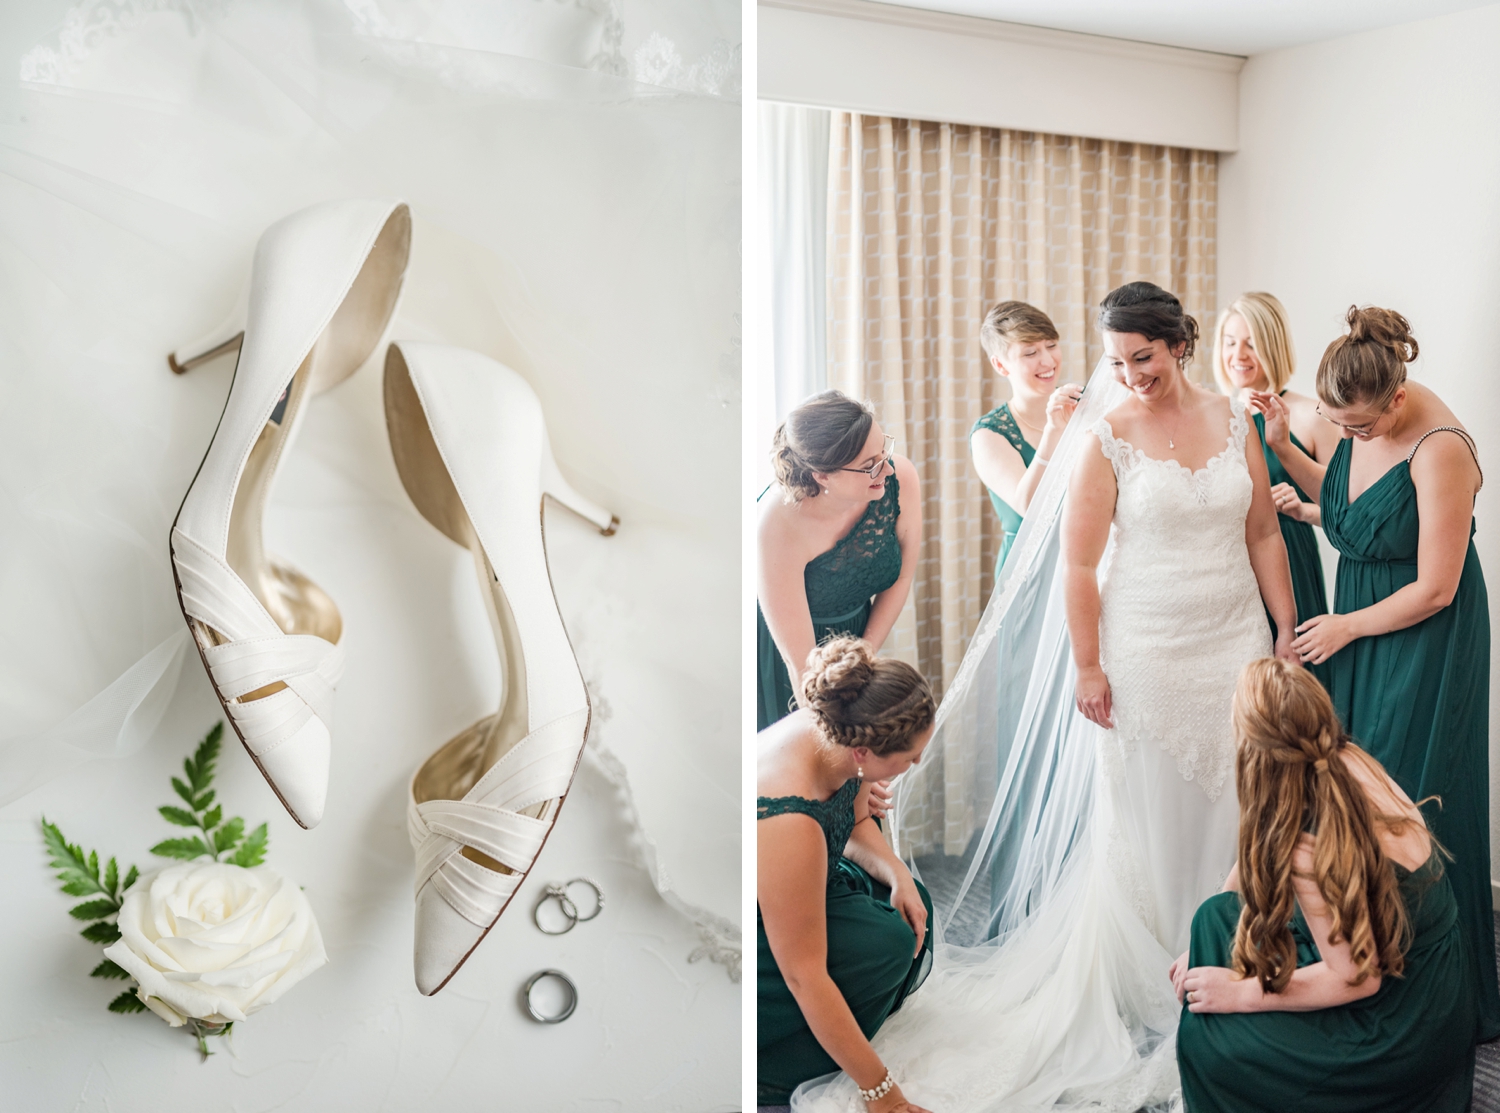 bridesmaids-helping-the-bride-get-ready-into-her-dress